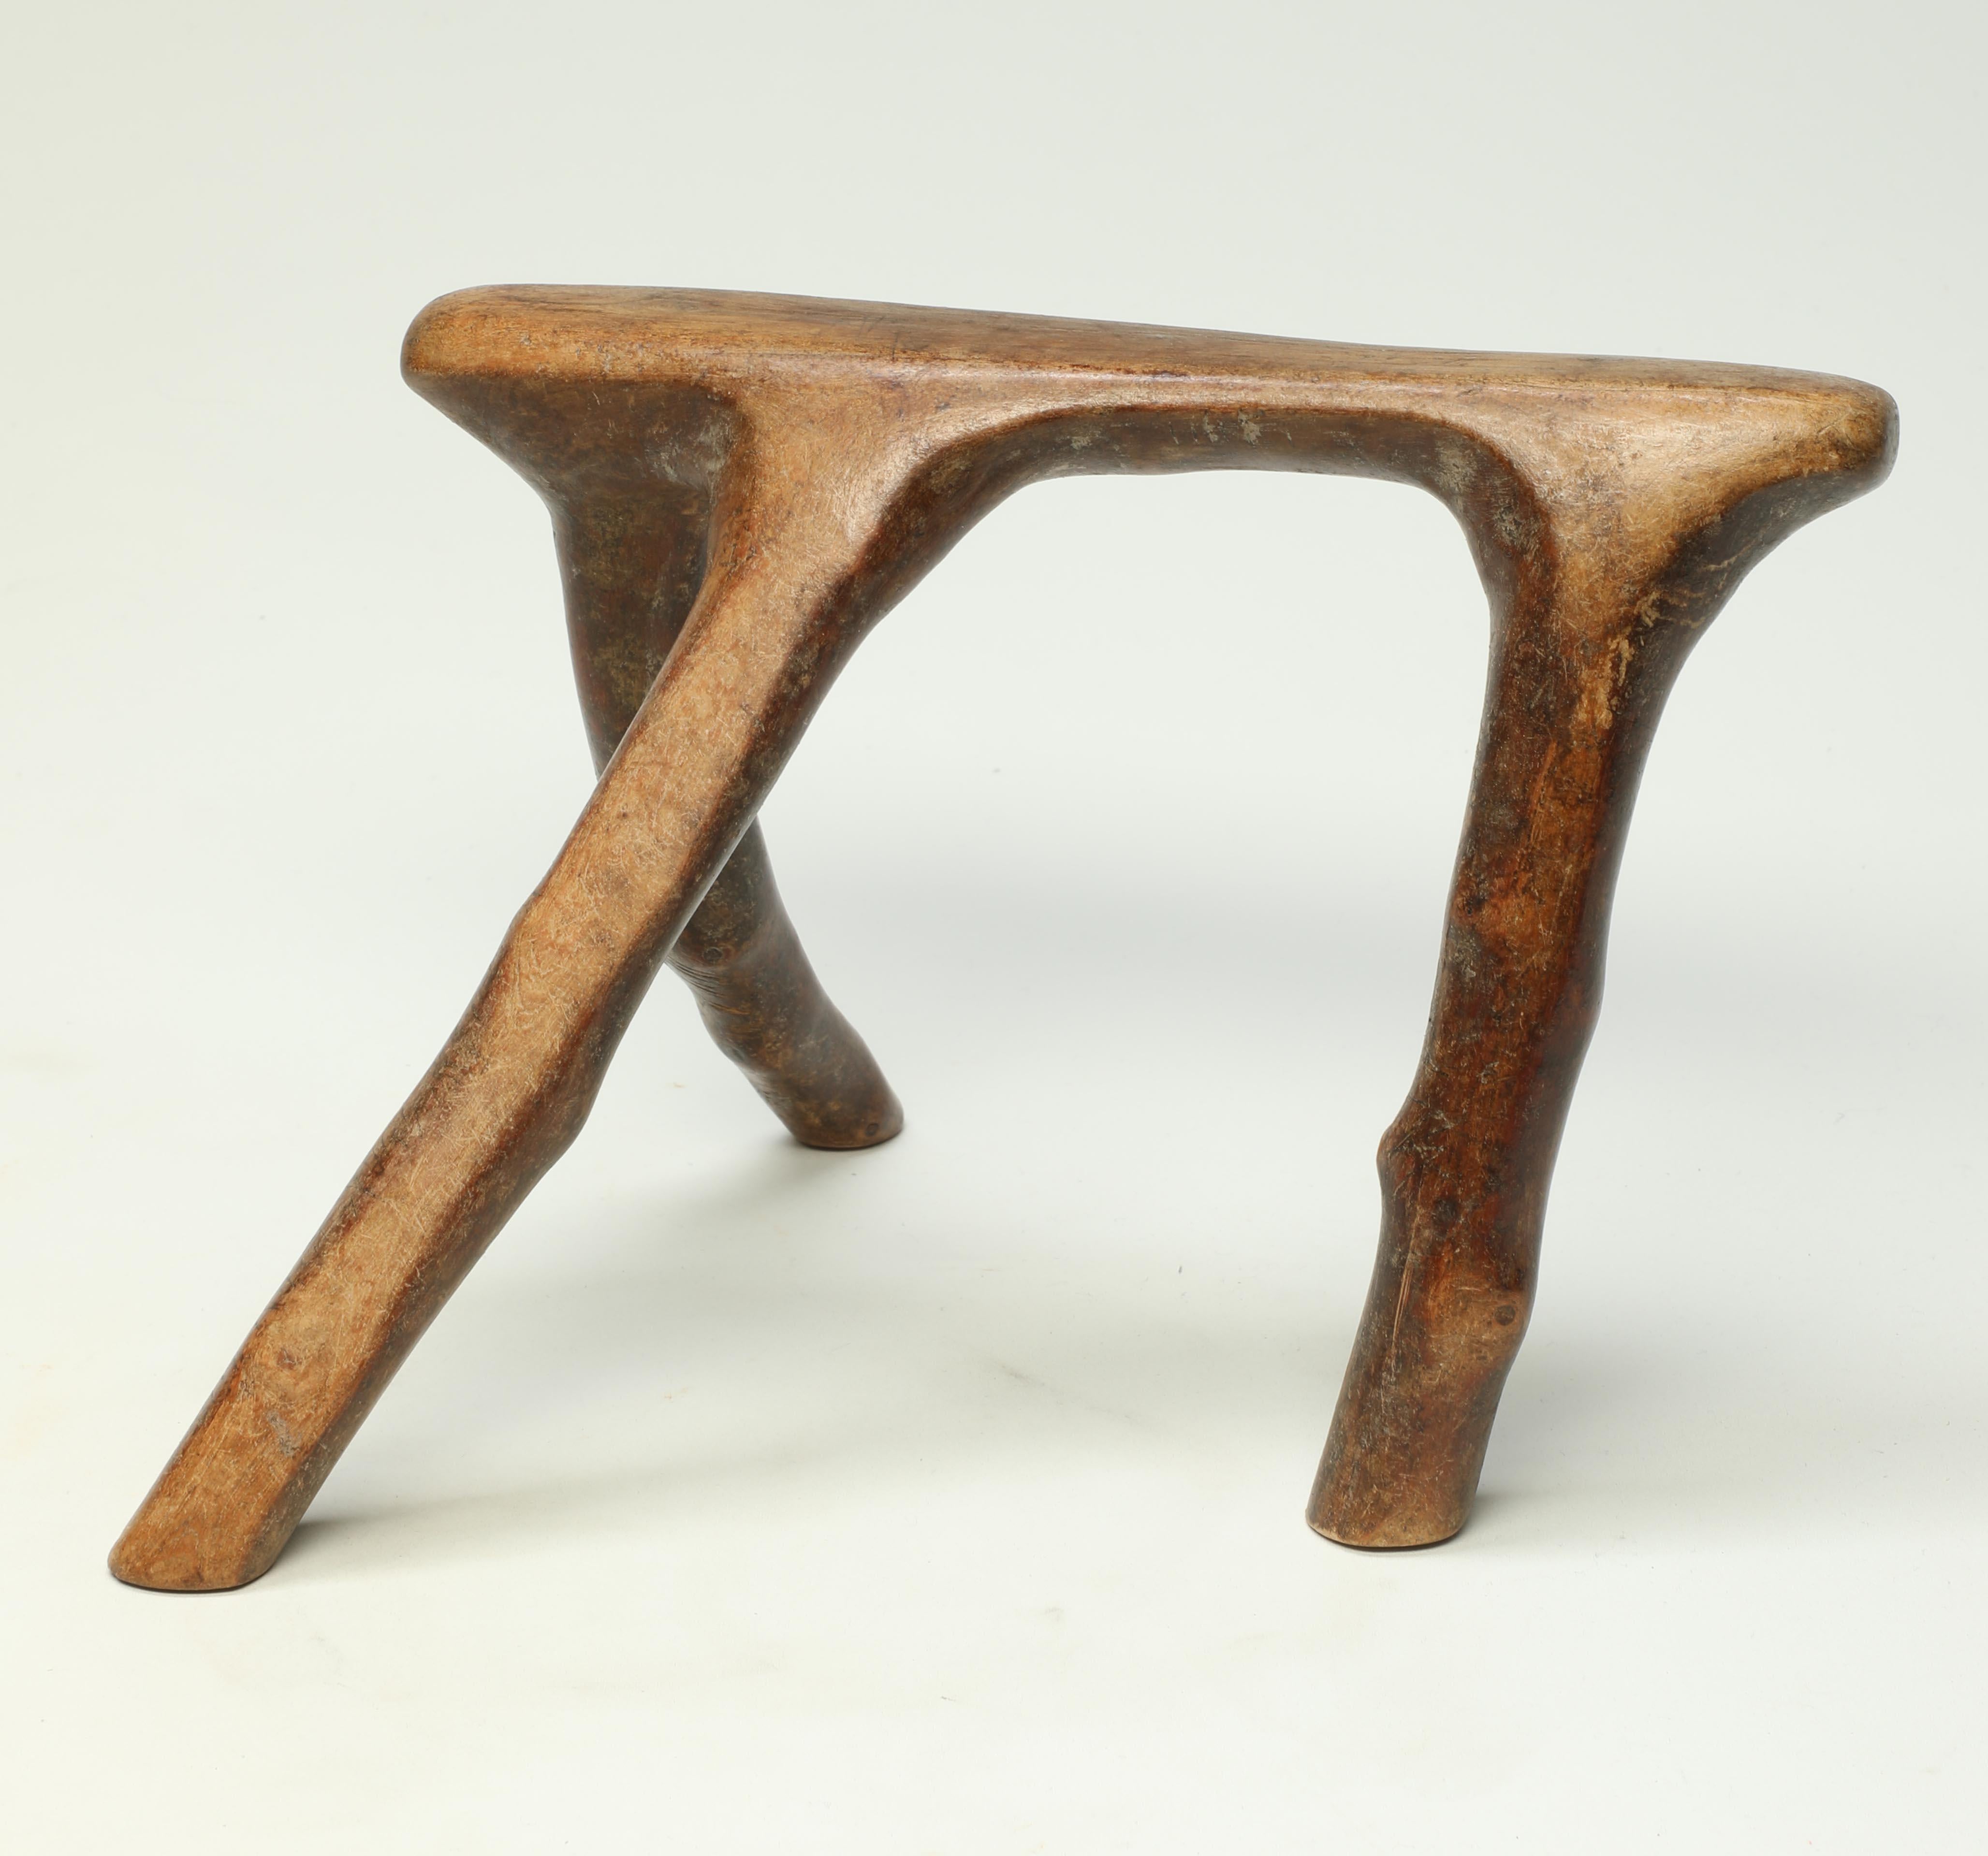 Kenya Tribal Wood Headrest, Stylized Natural Animal Form, African Old and Worn For Sale 1